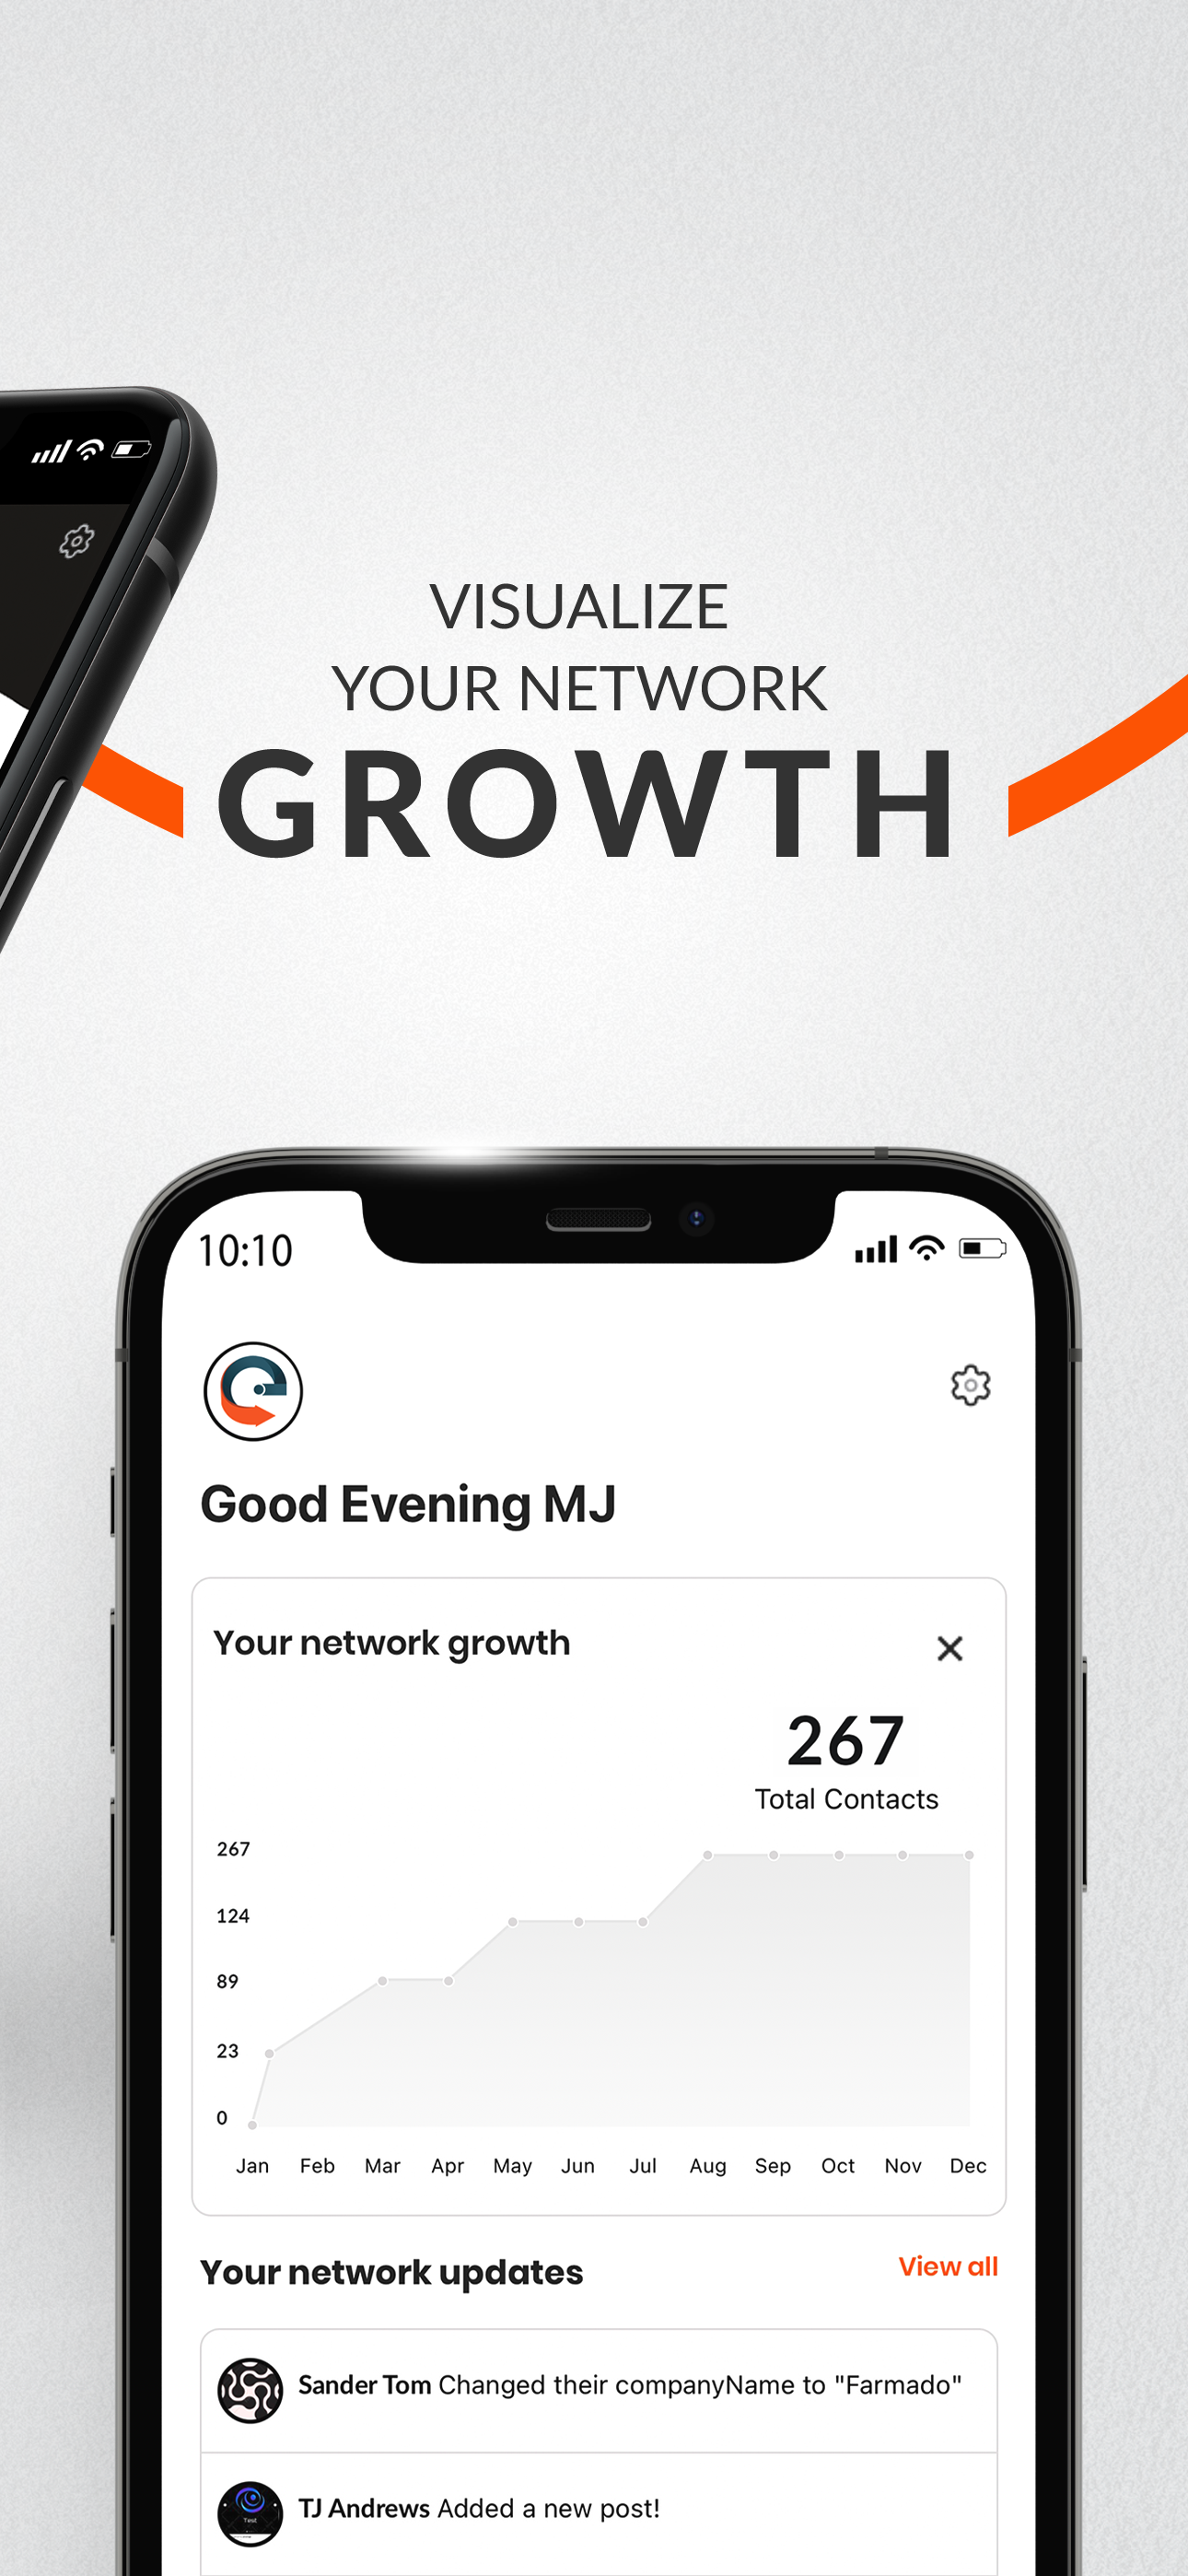 Visualize your network growth